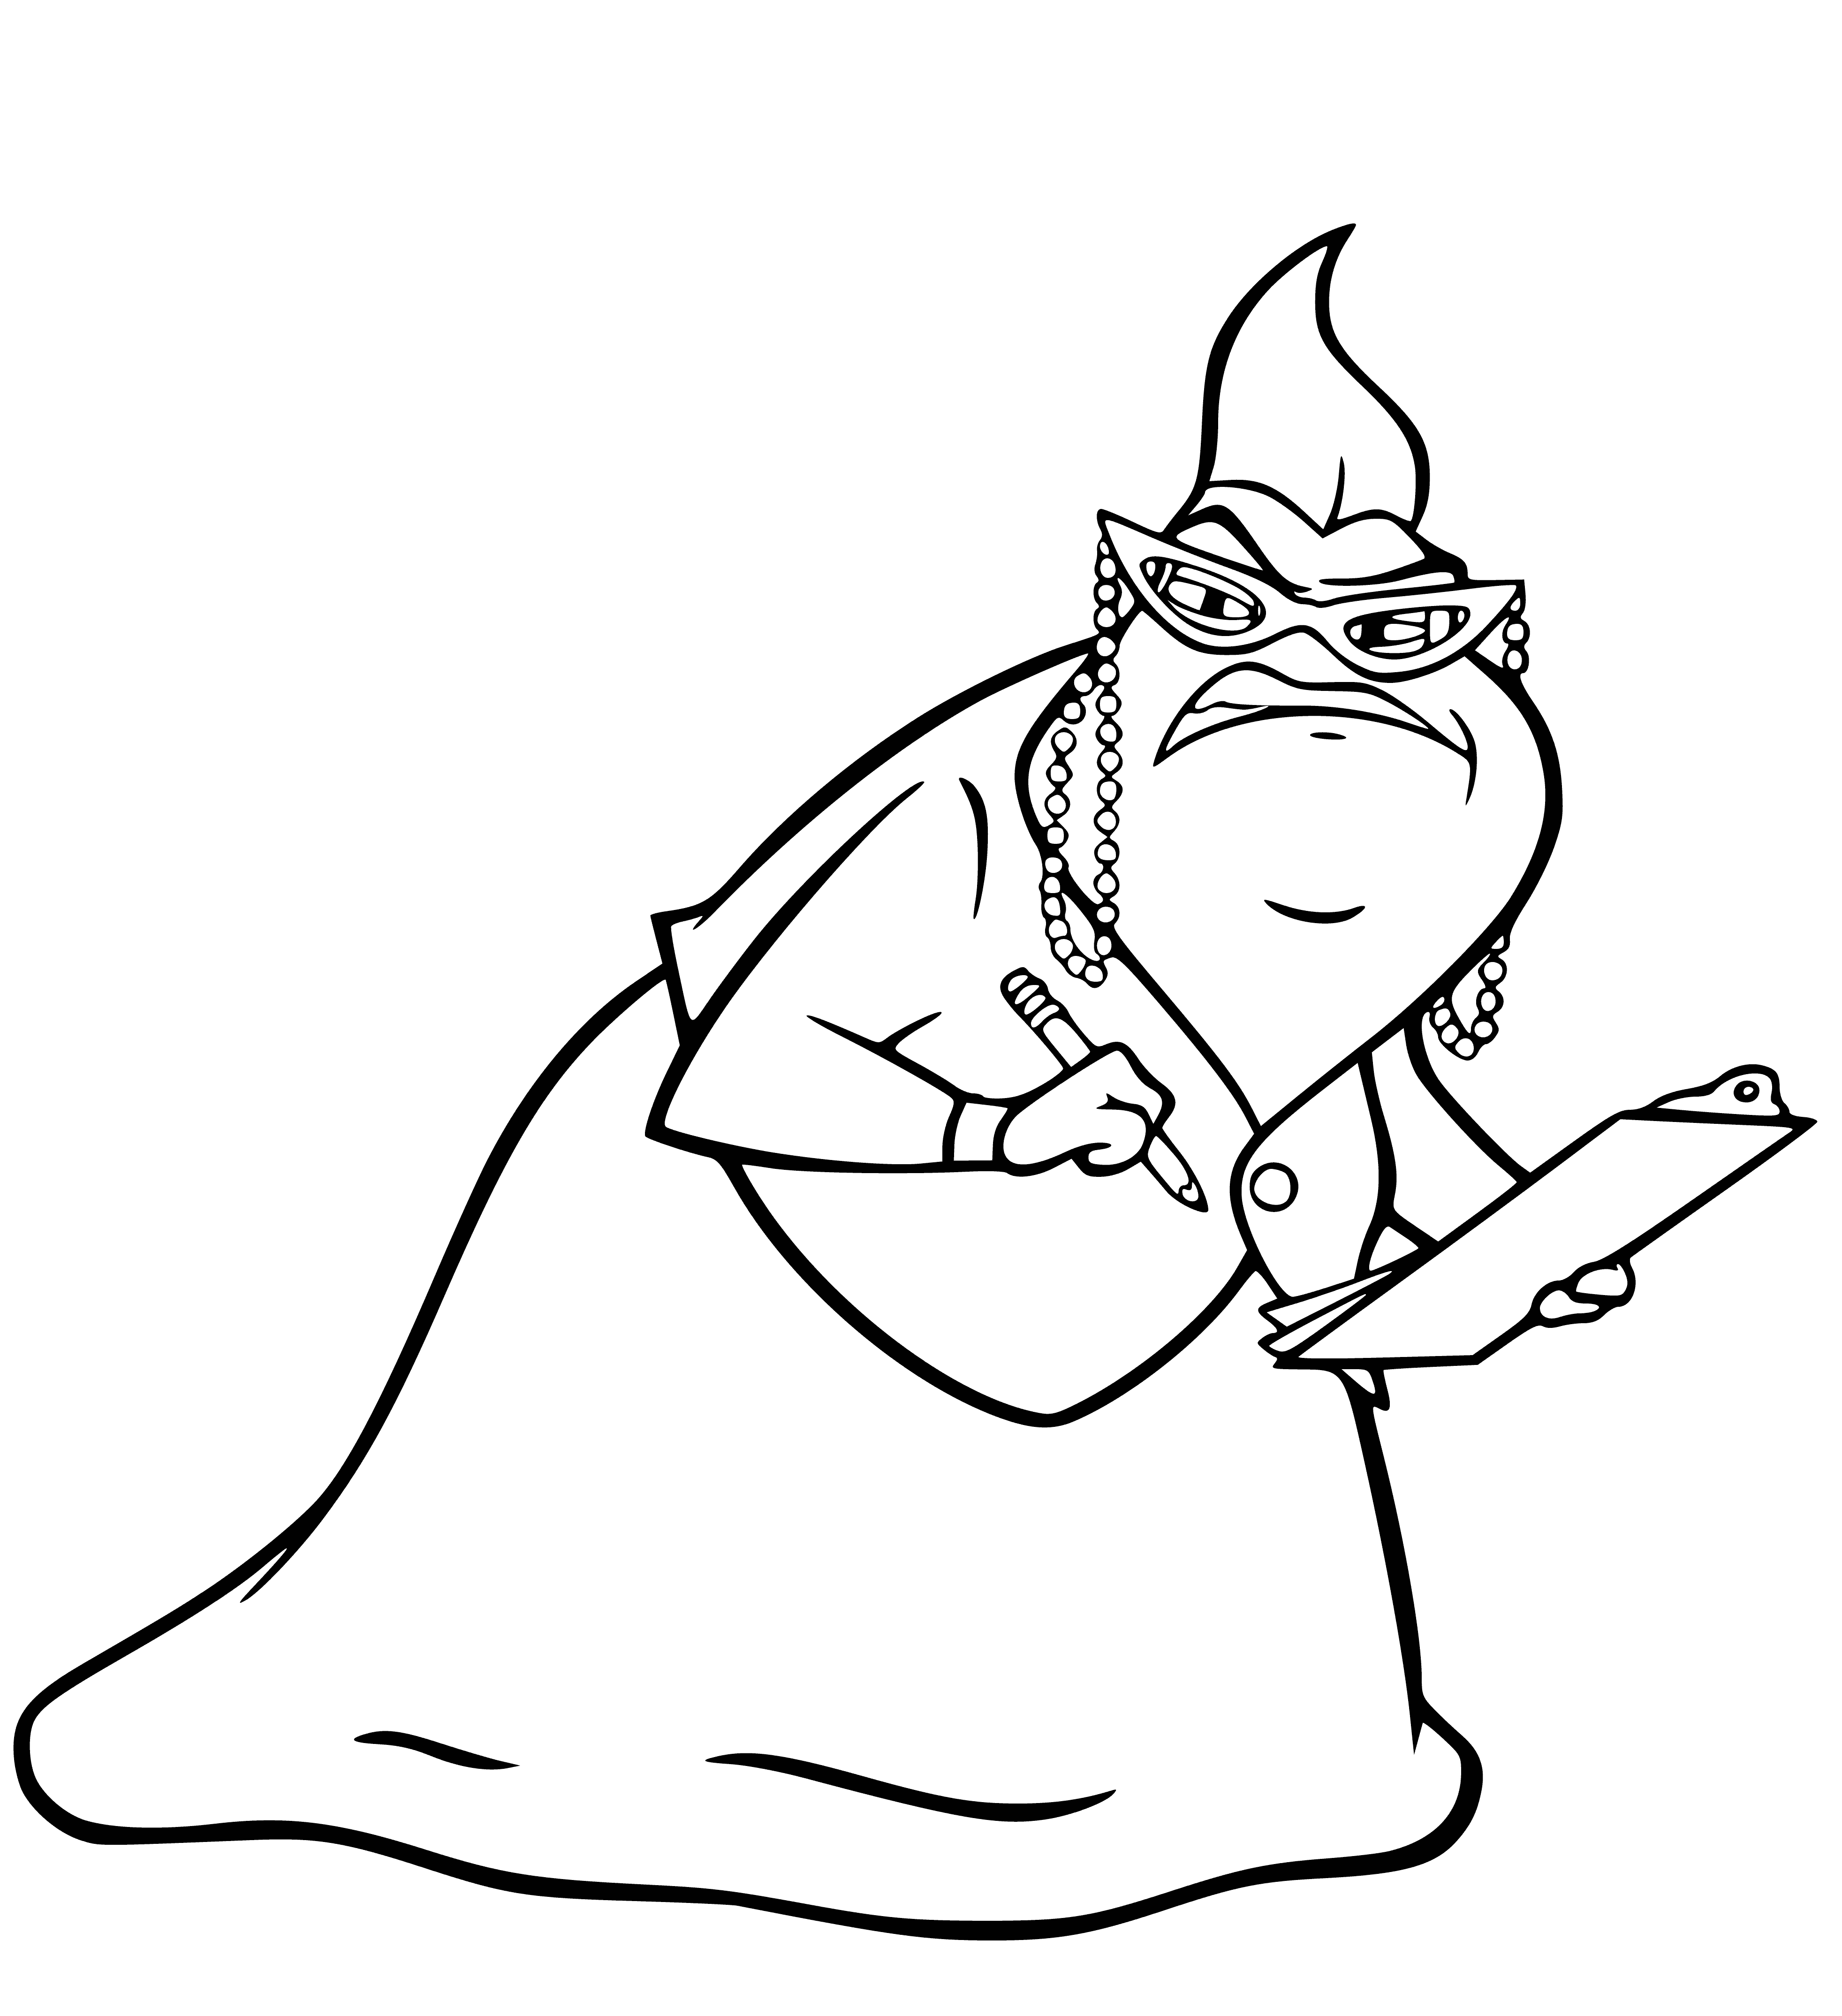 coloring page: Aunt Angry: big green slimy monster, 3 eyes, big mouth, sharp teeth, wearing purple dress, blue scarf, very angry.